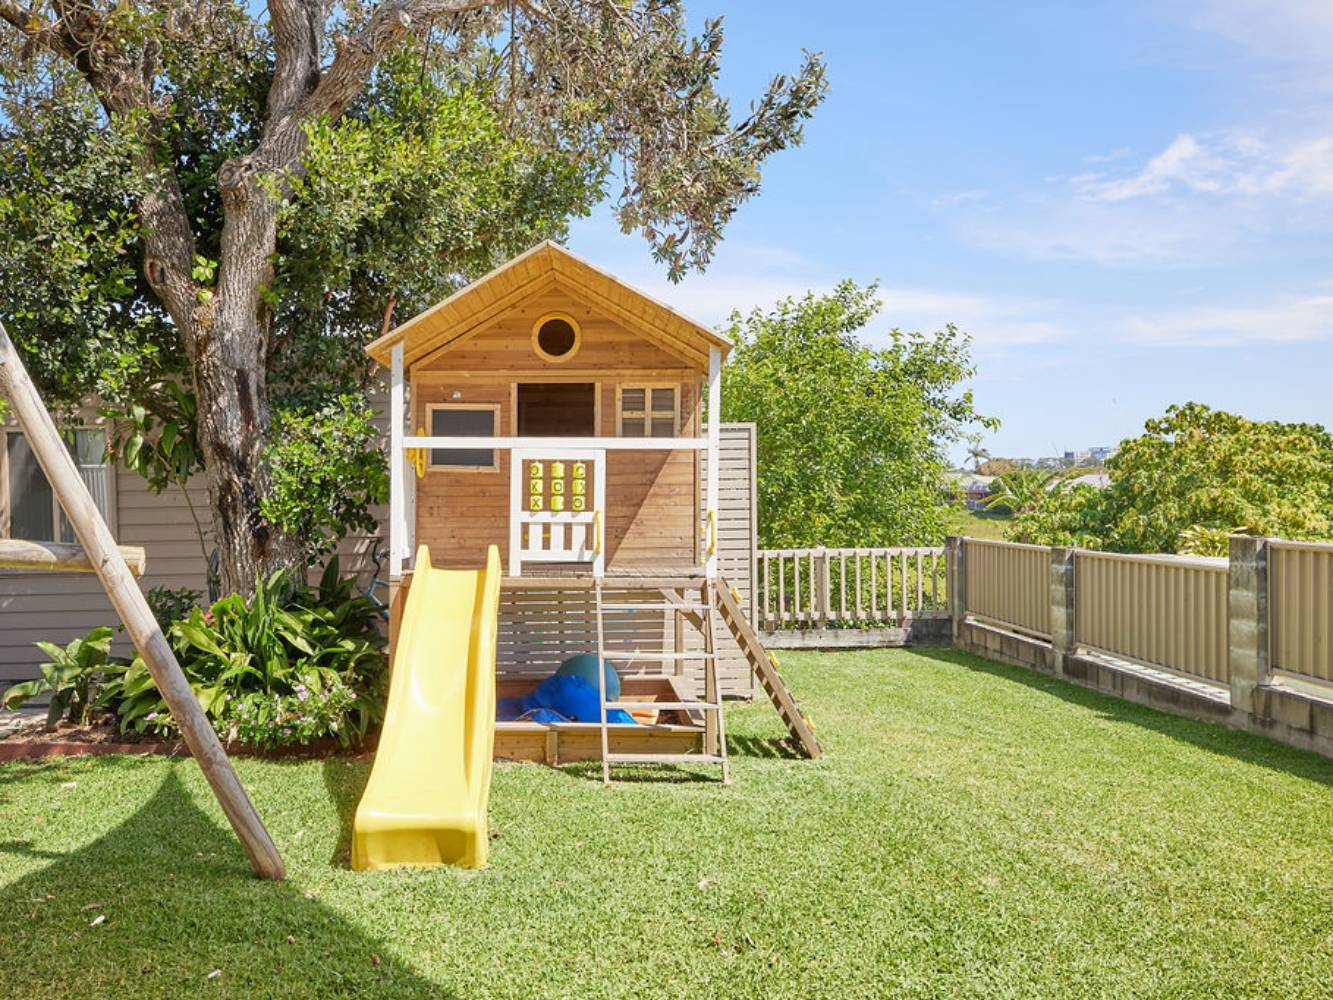 Large backyard and swing set and cubby house